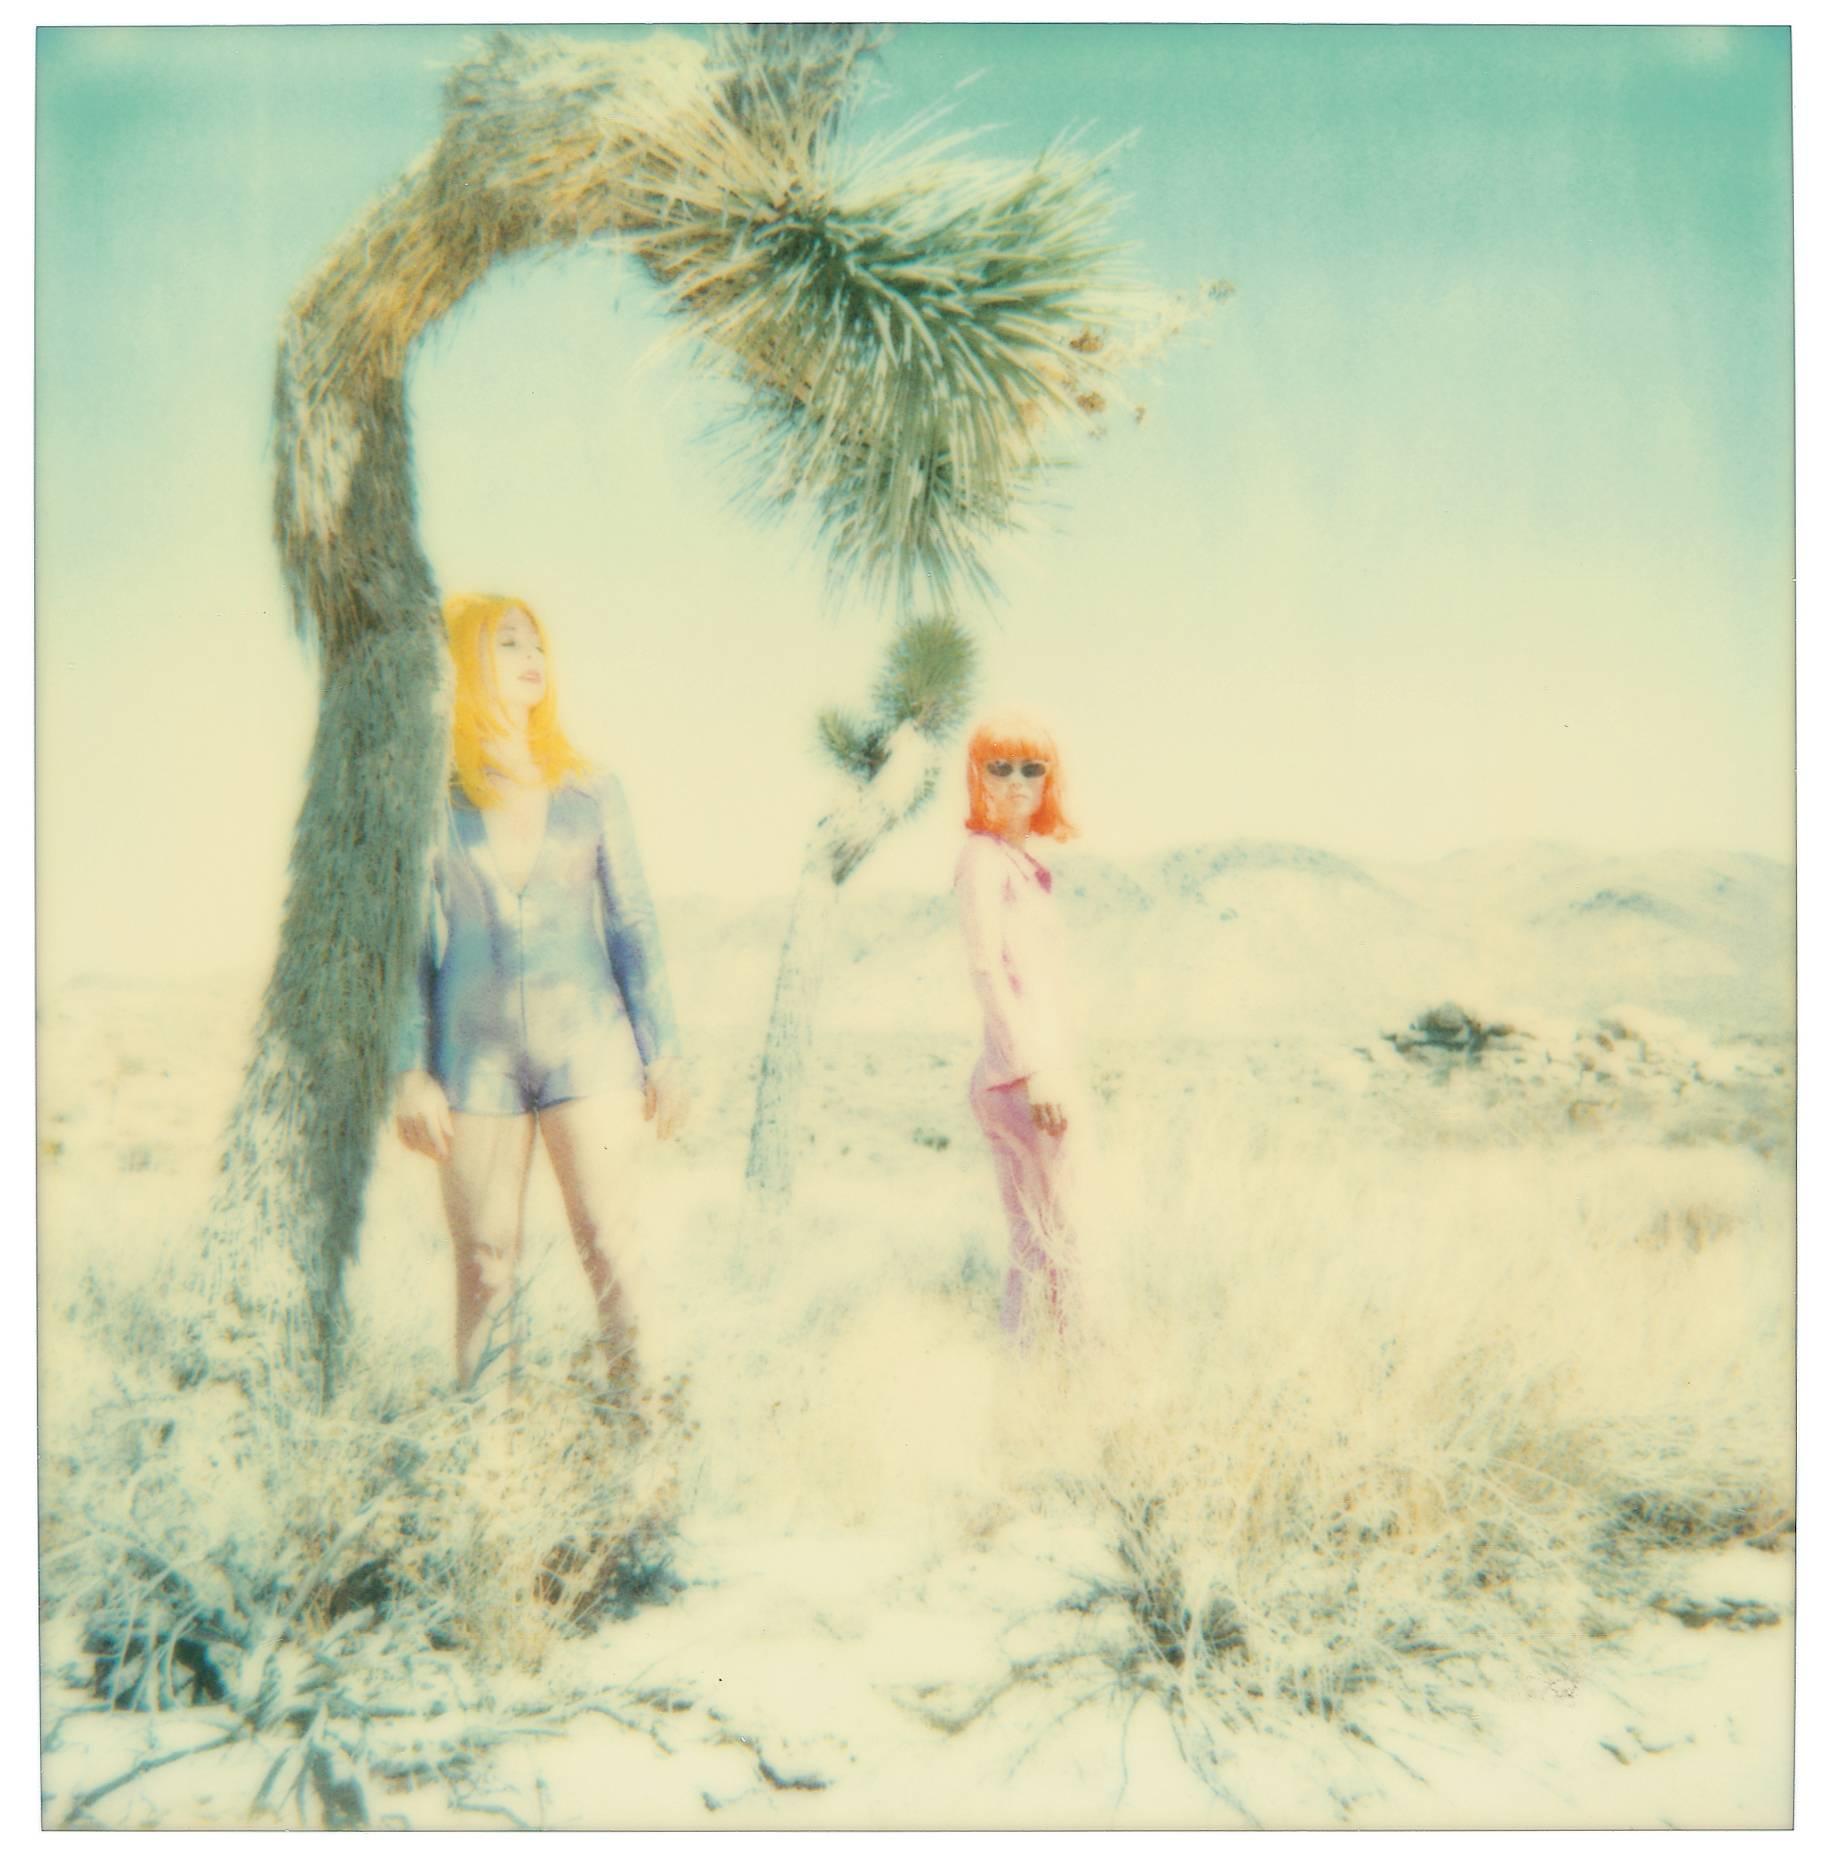 Stefanie Schneider Landscape Photograph - Long Way Home II, AP2/2, with Radha & Max, Color, Photography, Polaroid, expired